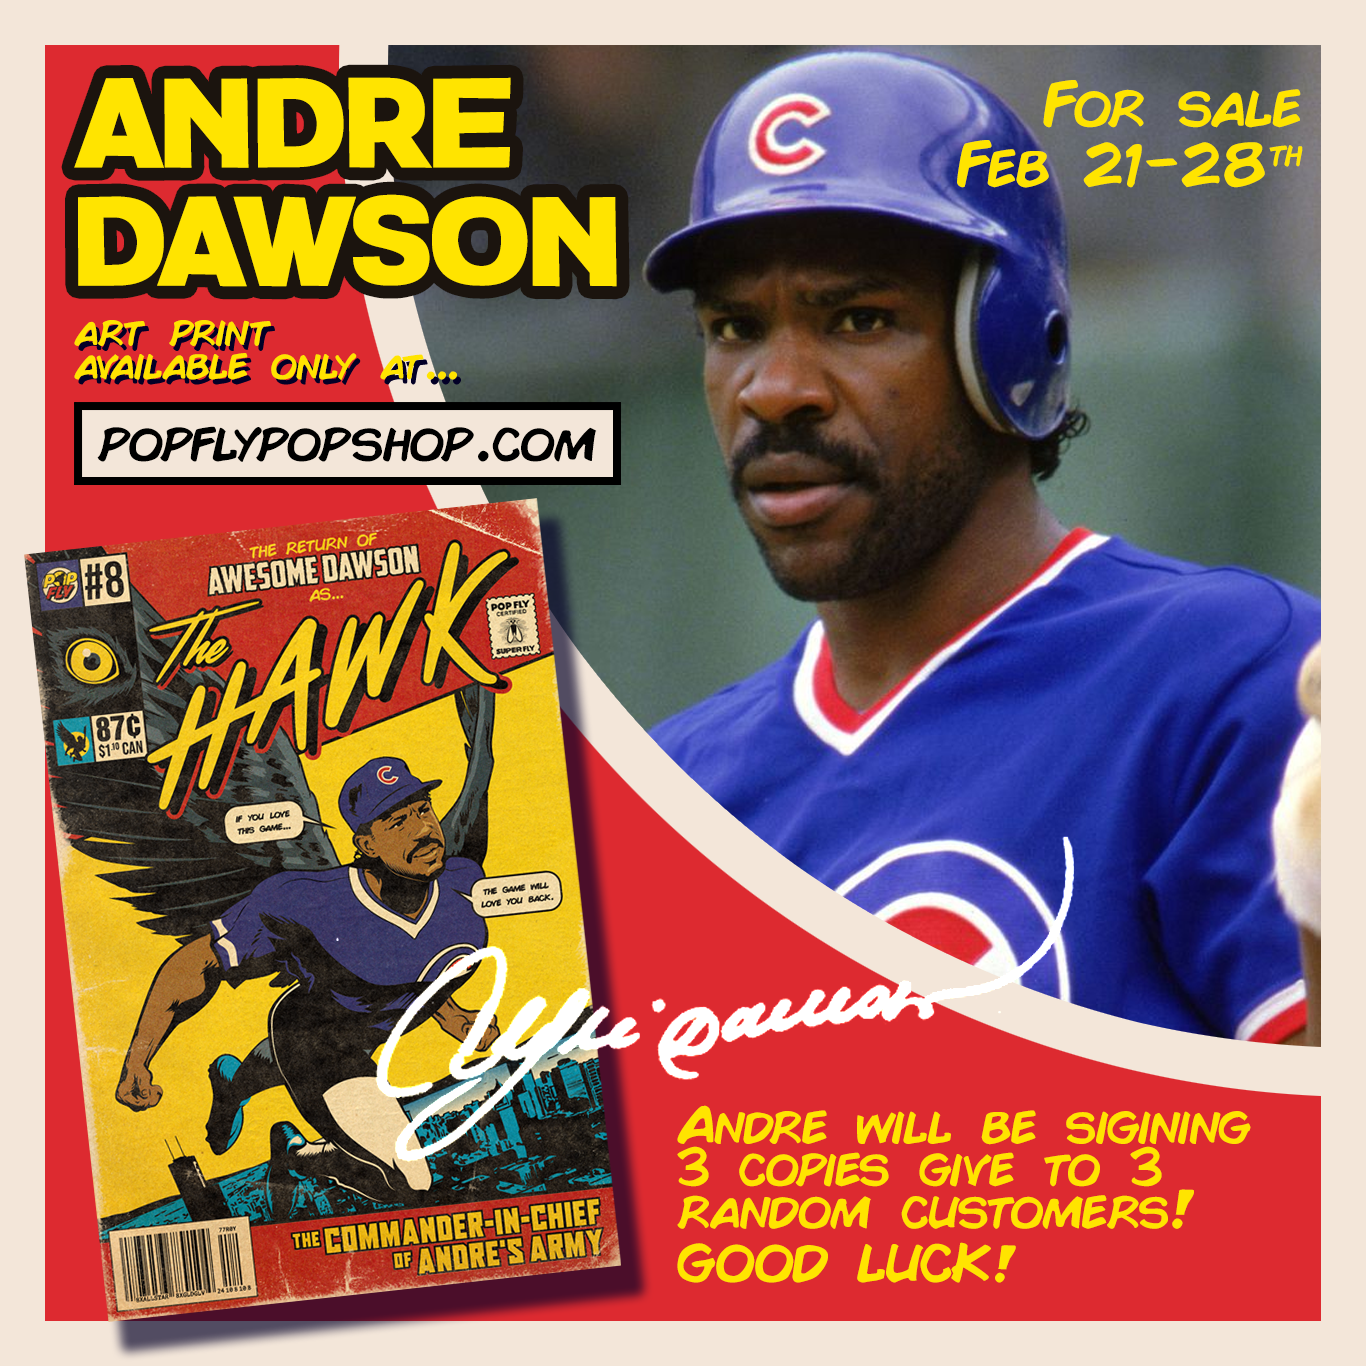 31. (SOLD OUT) "The Hawk" Andre Dawson 7" X 10.5" Art Print